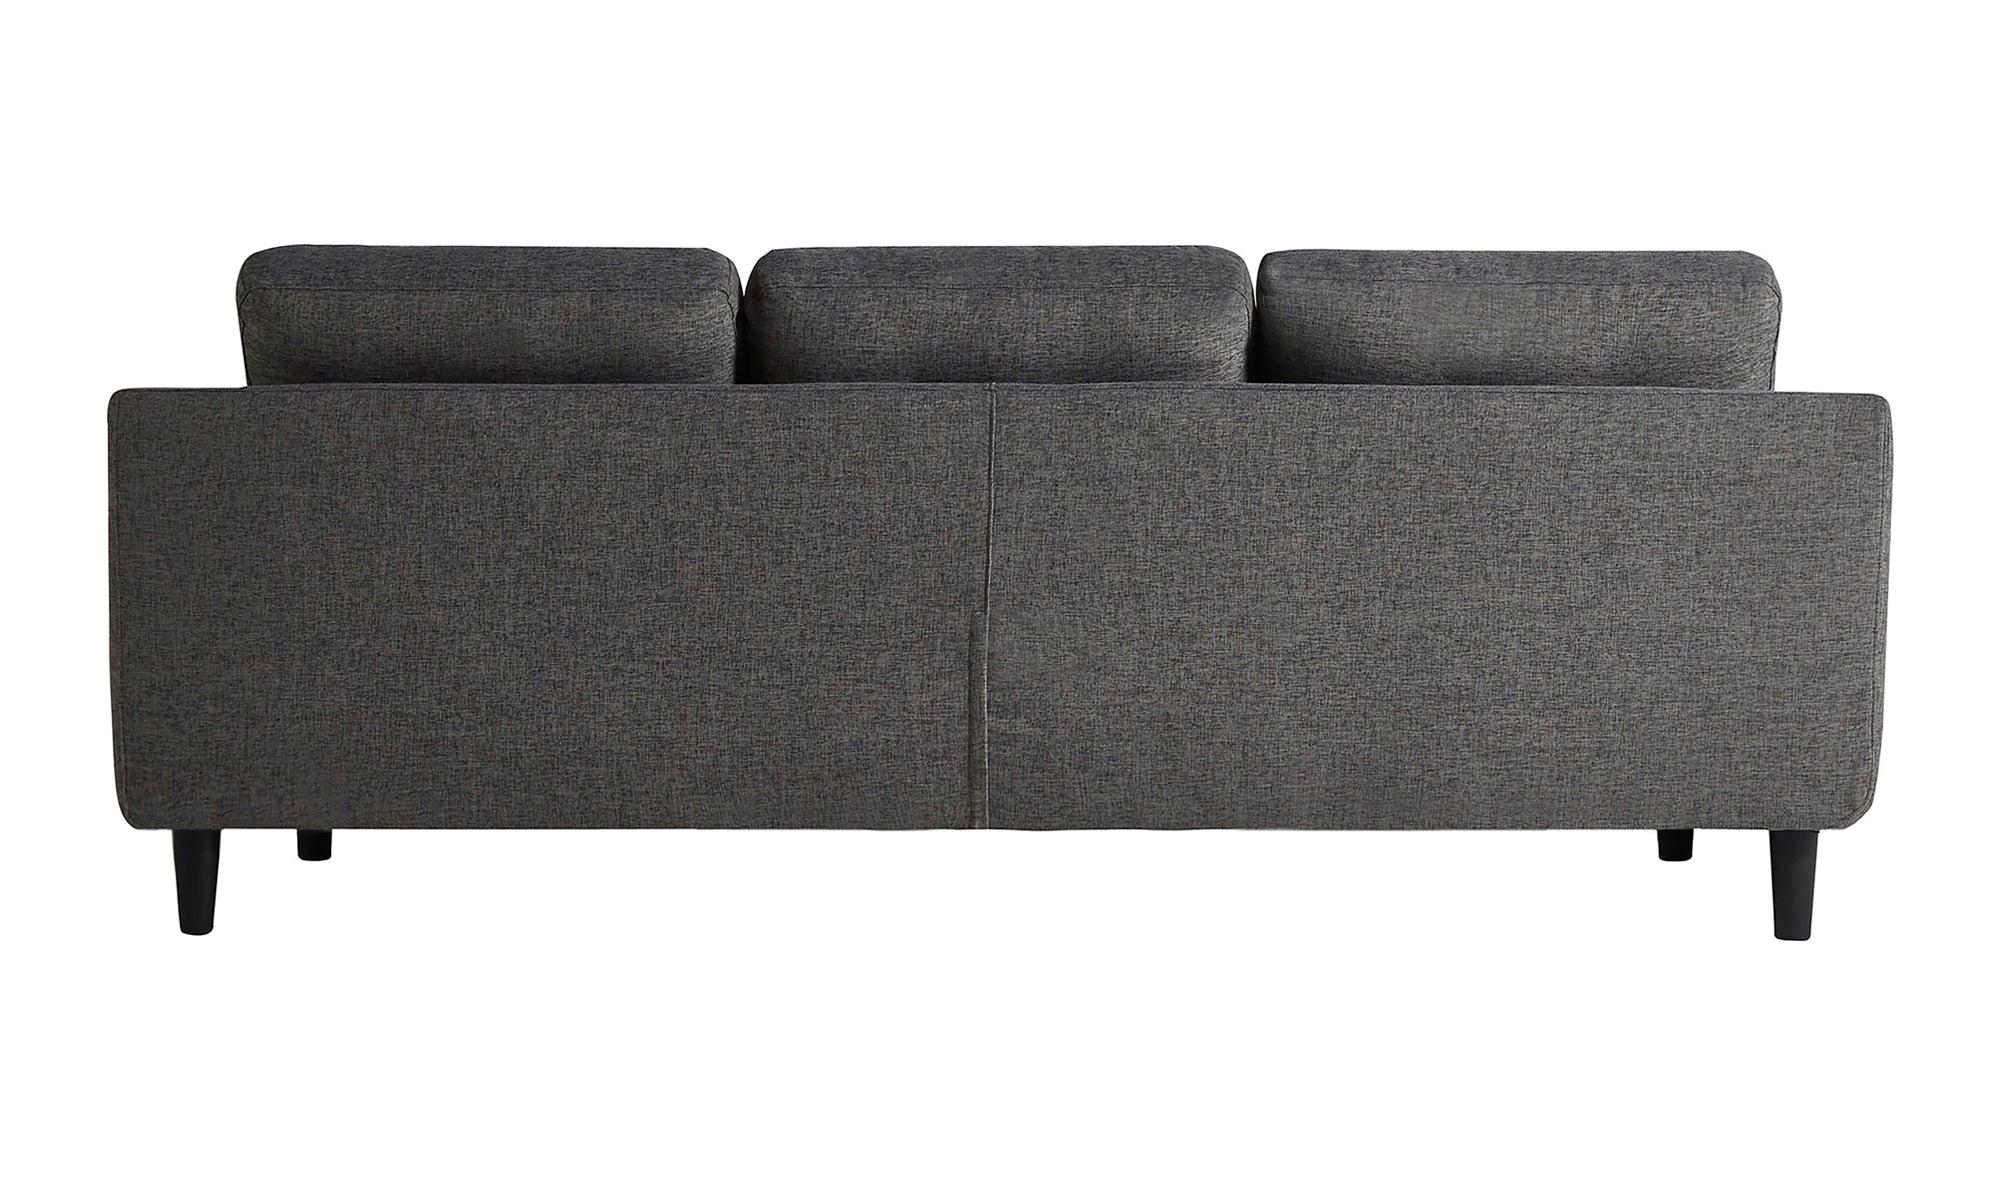 Belagio Right Facing Sofa Bed With Chaise - Charcoal Grey